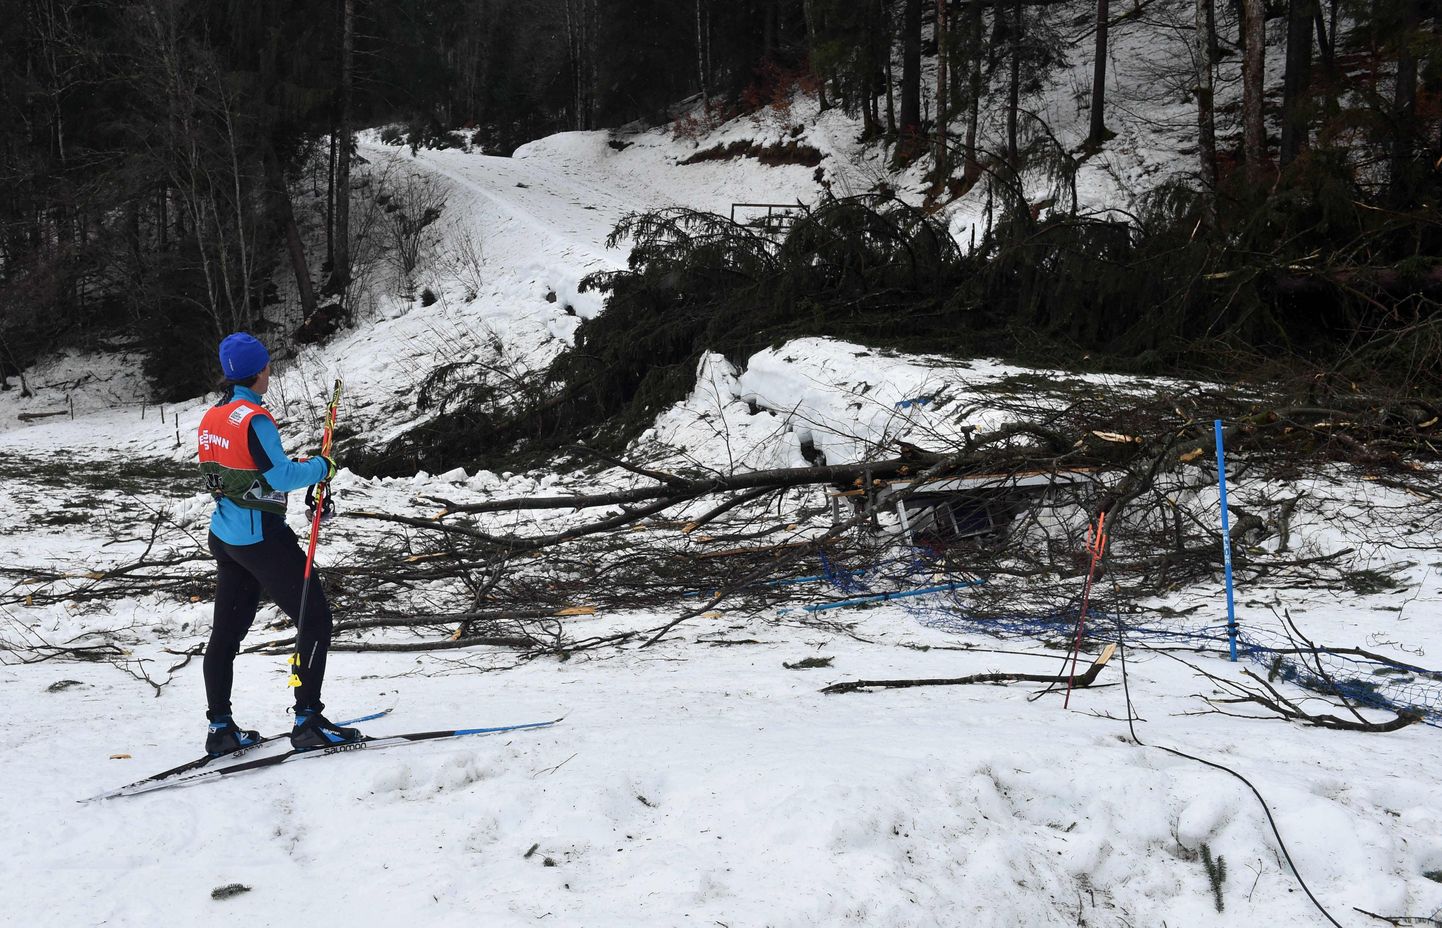 A skier looks at fallen trees before the sprint classic style event of the "Tour de Ski" Cross Country World Cup, that was cancelled afterwards because of stormy weather, on January 3, 2018 s in Oberstdorf, southern Germany. / AFP PHOTO / CHRISTOF STACHE